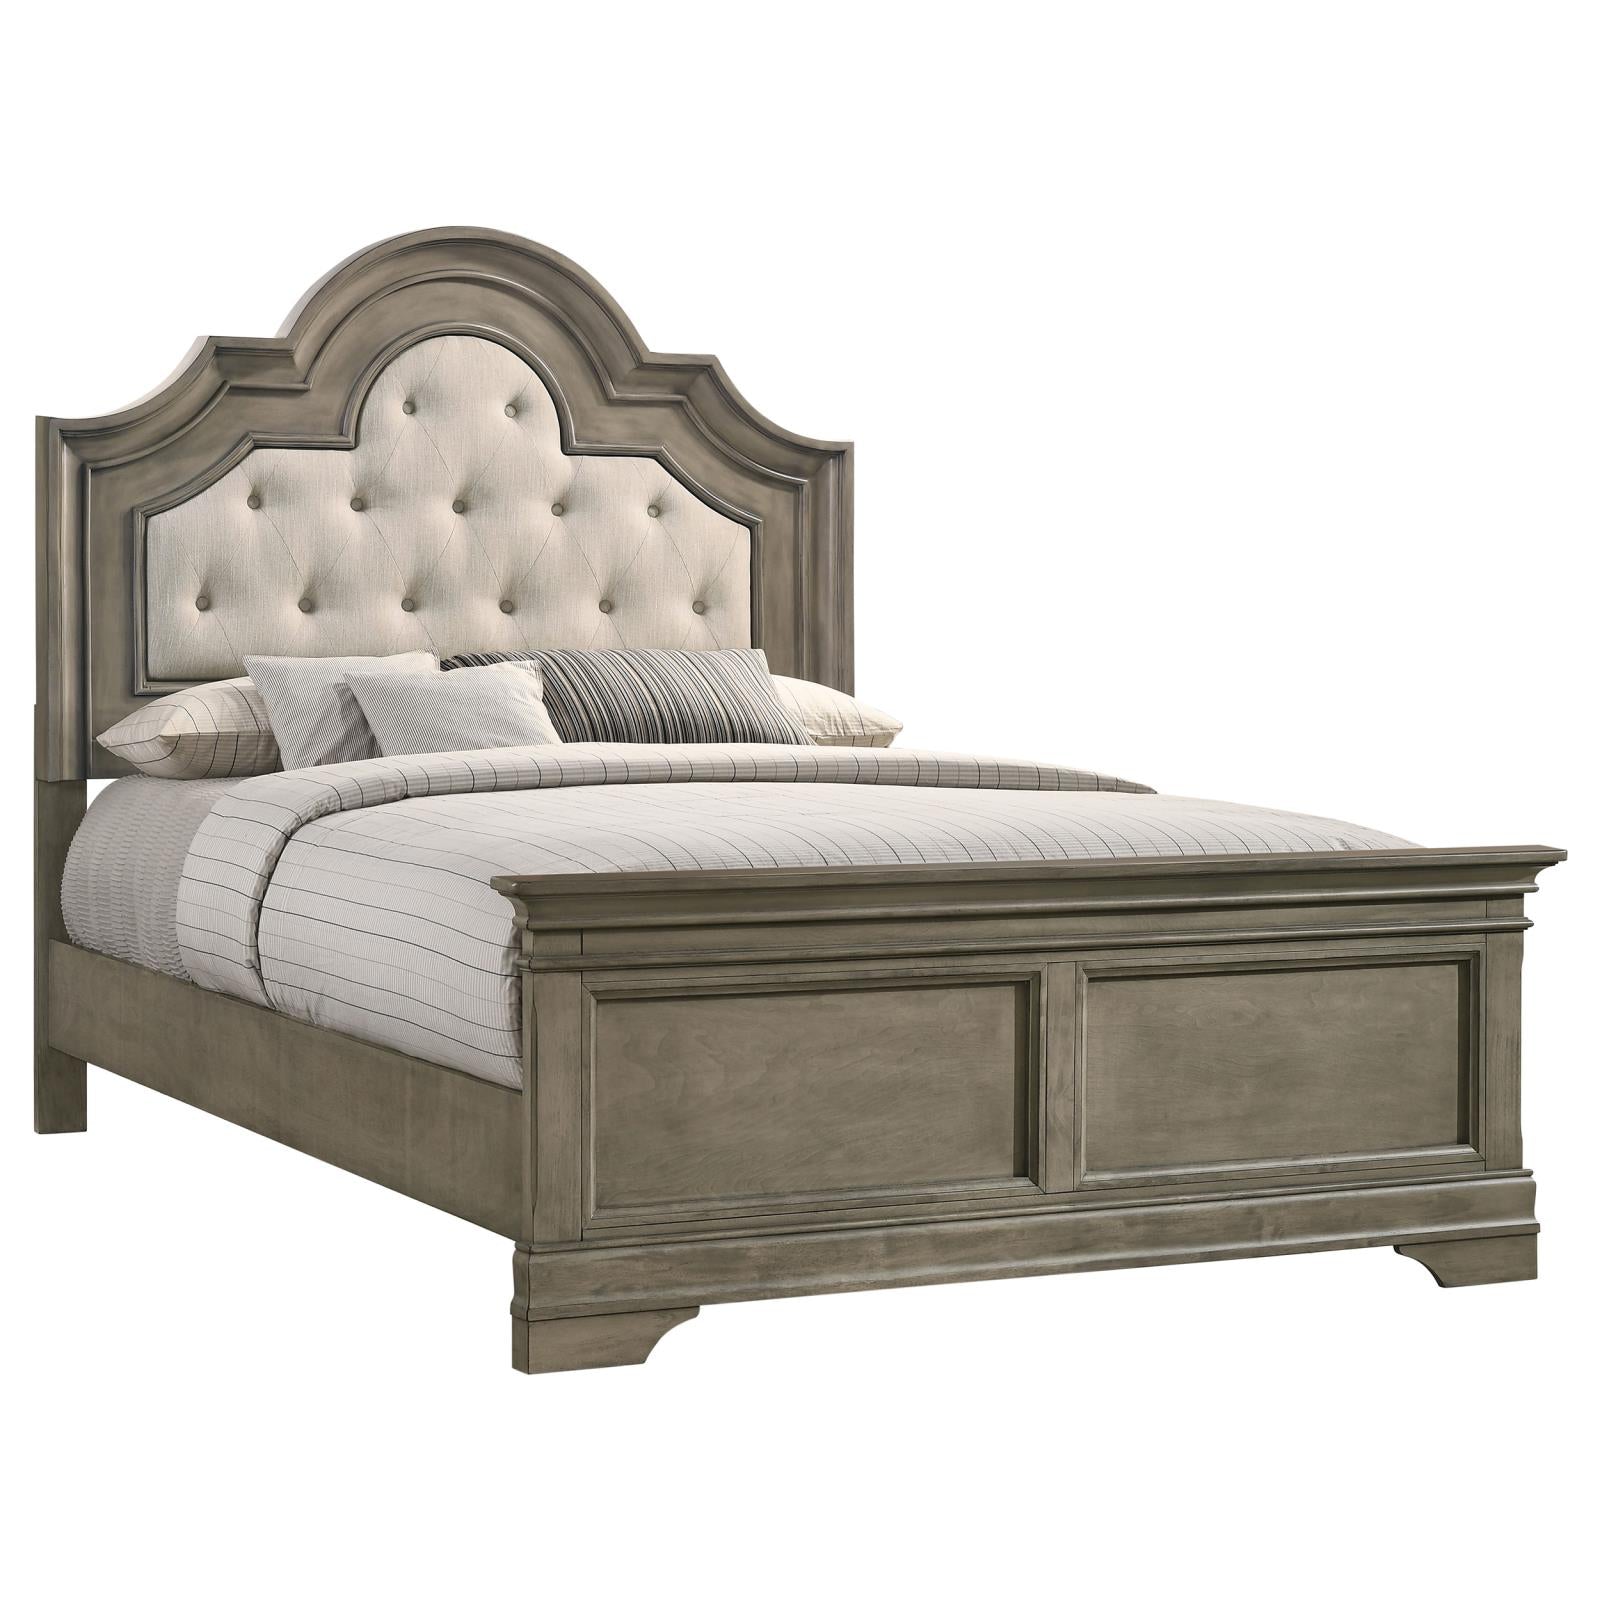 Manchester Bed with Upholstered Arched Headboard Beige and Wheat - Luna  Furniture